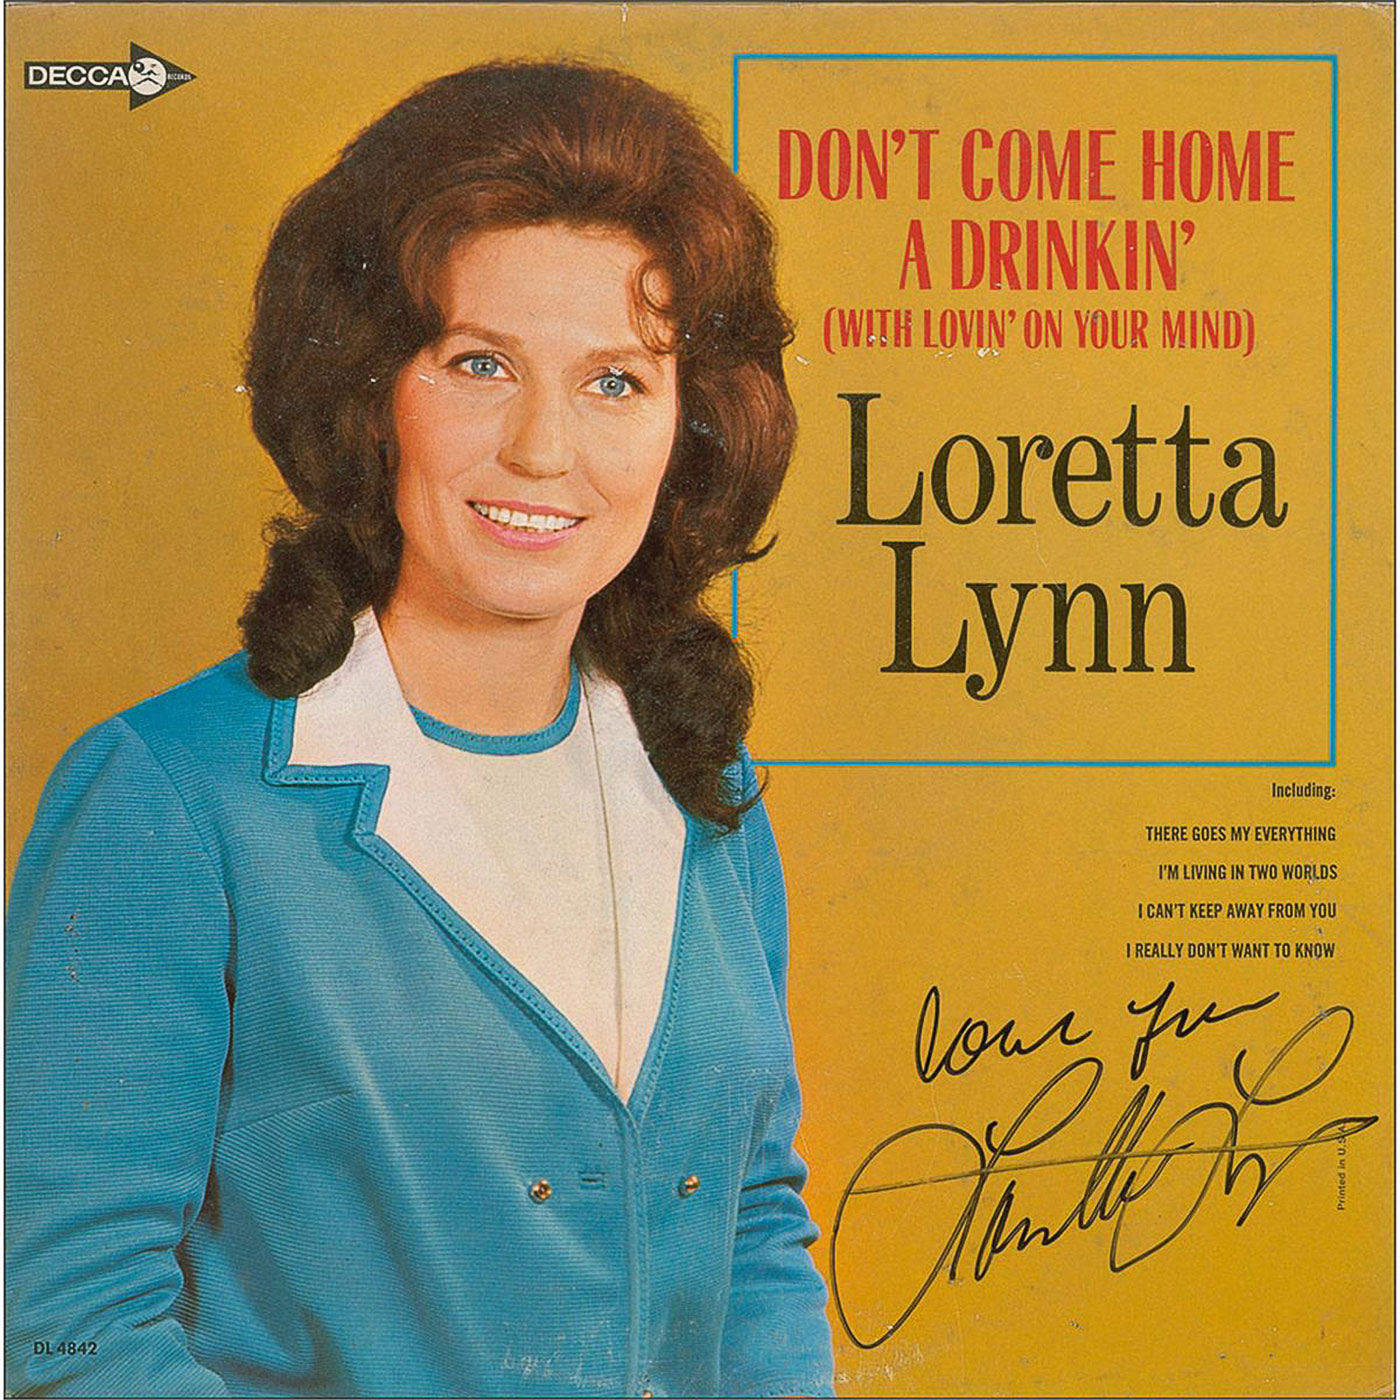 102 Loretta Lynn – Don’t Come Home a Drinkin’ (With Lovin’ on Your Mind)